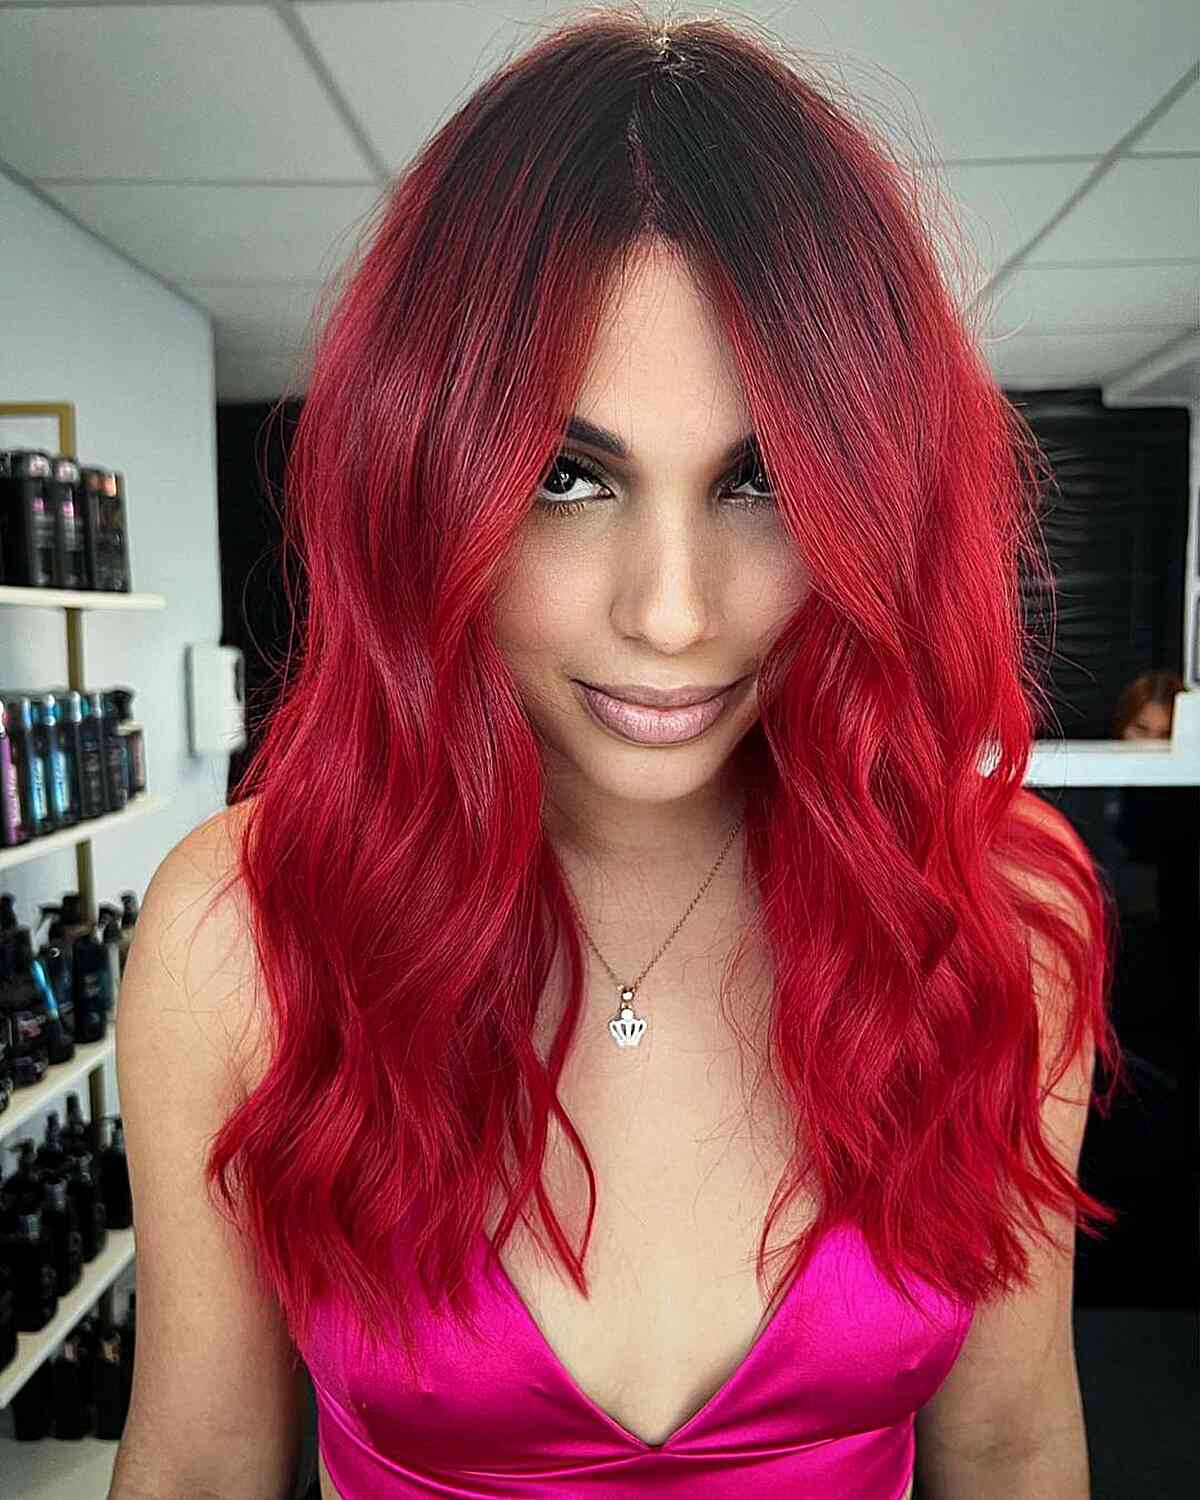 Dark Rooted Vibrant Red Hair for ladies with oval faces